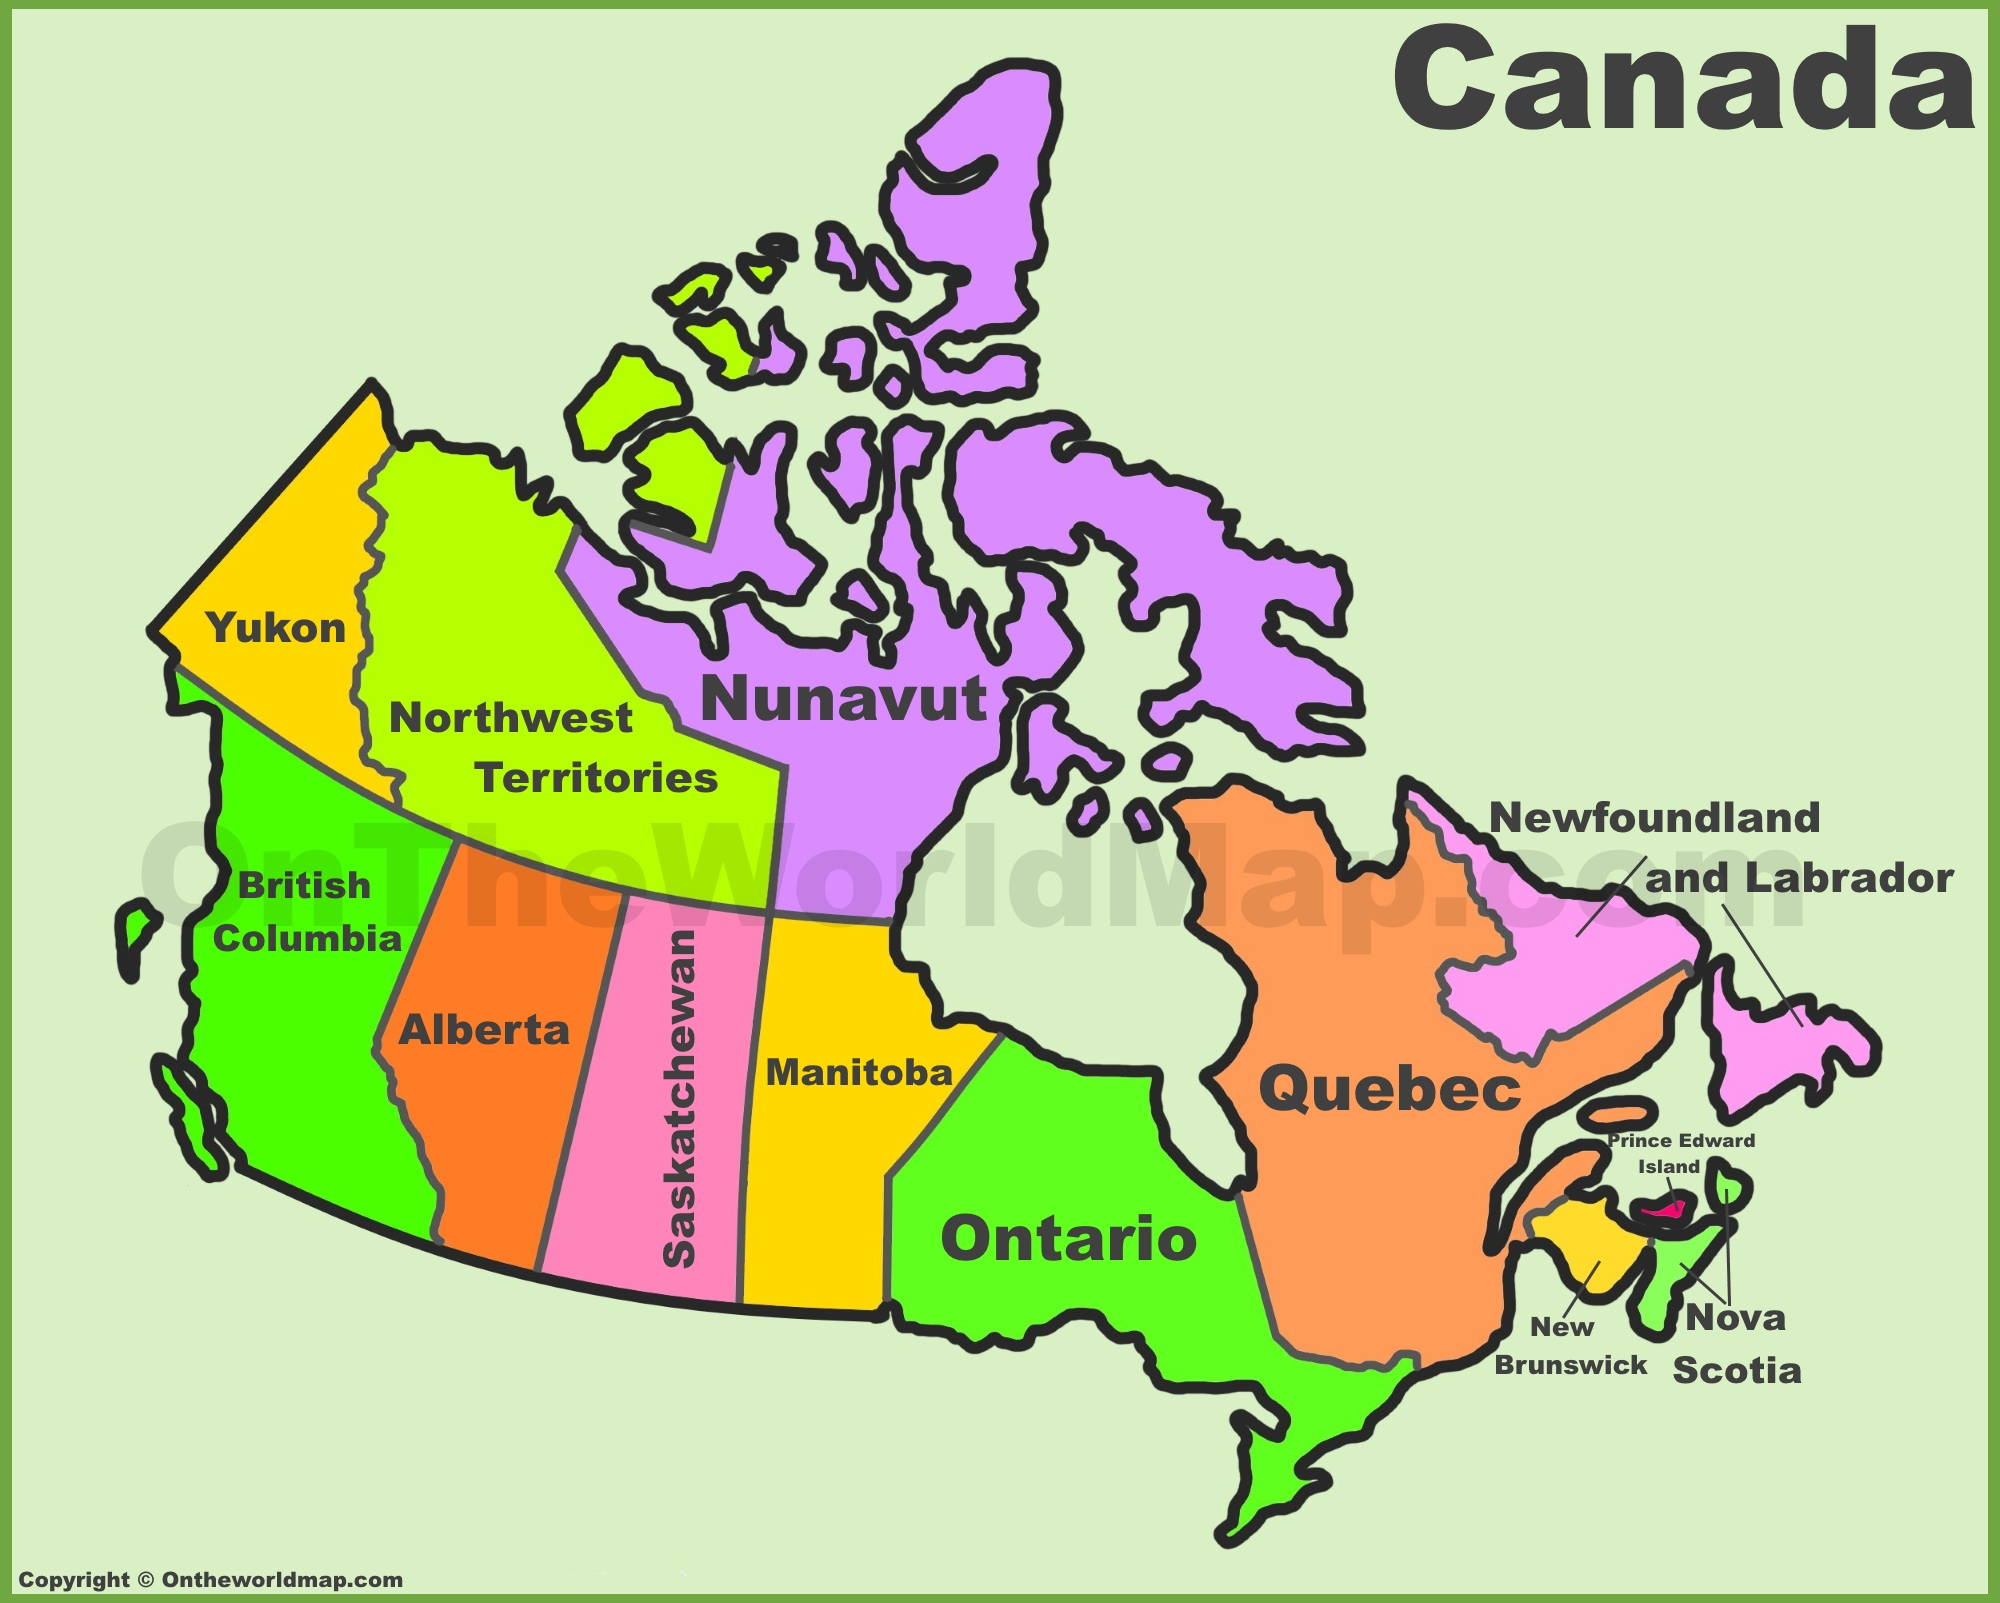 Canada Provinces And Territories Map | List Of Canada Provinces And - Large Printable Map Of Canada